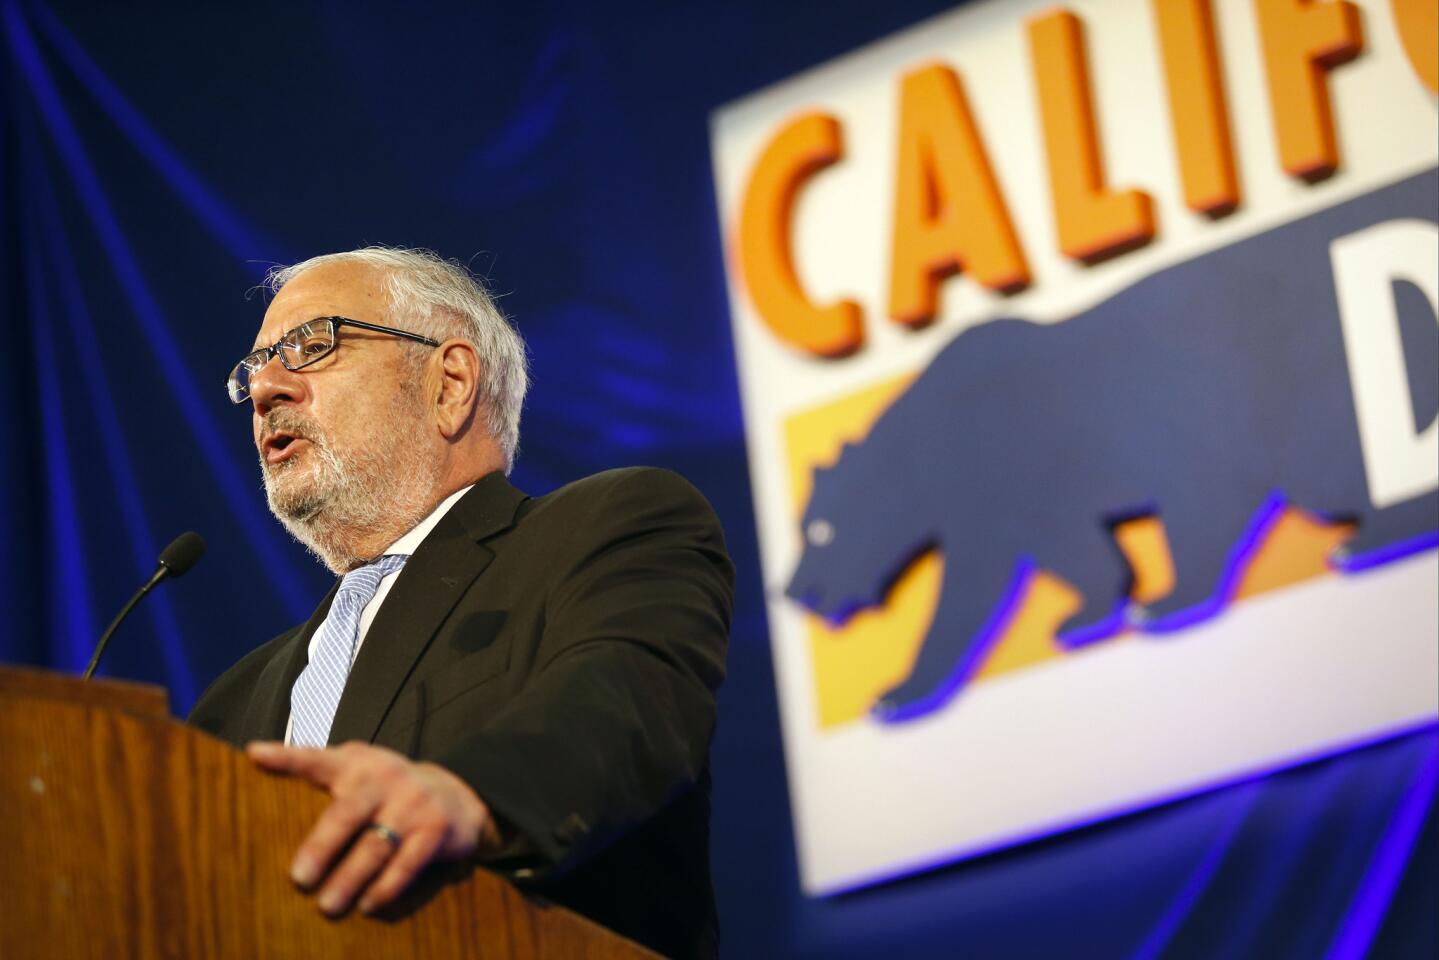 Former Rep. Barney Frank of Massachusetts speaks at the California Democratic Party Convention in Anaheim.